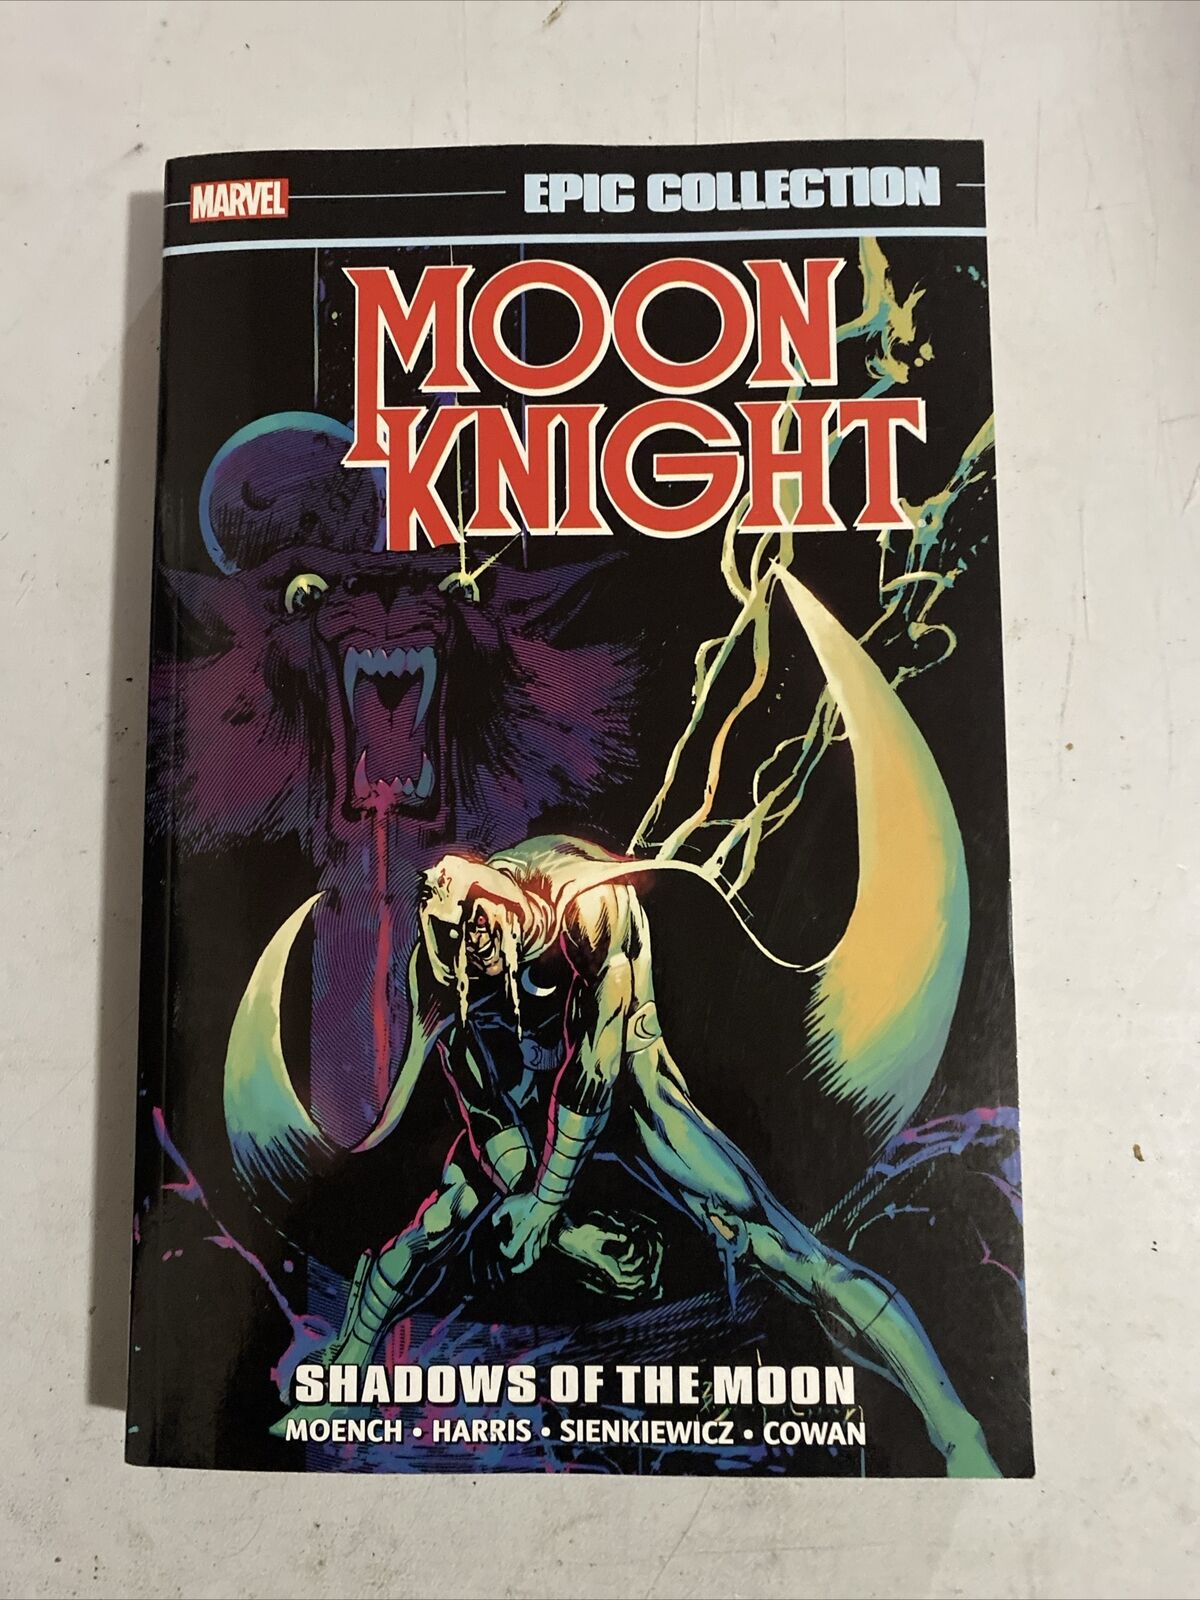 Moon Knight - Marvel Epic Collection Vol. 2 Shadows of the Moon